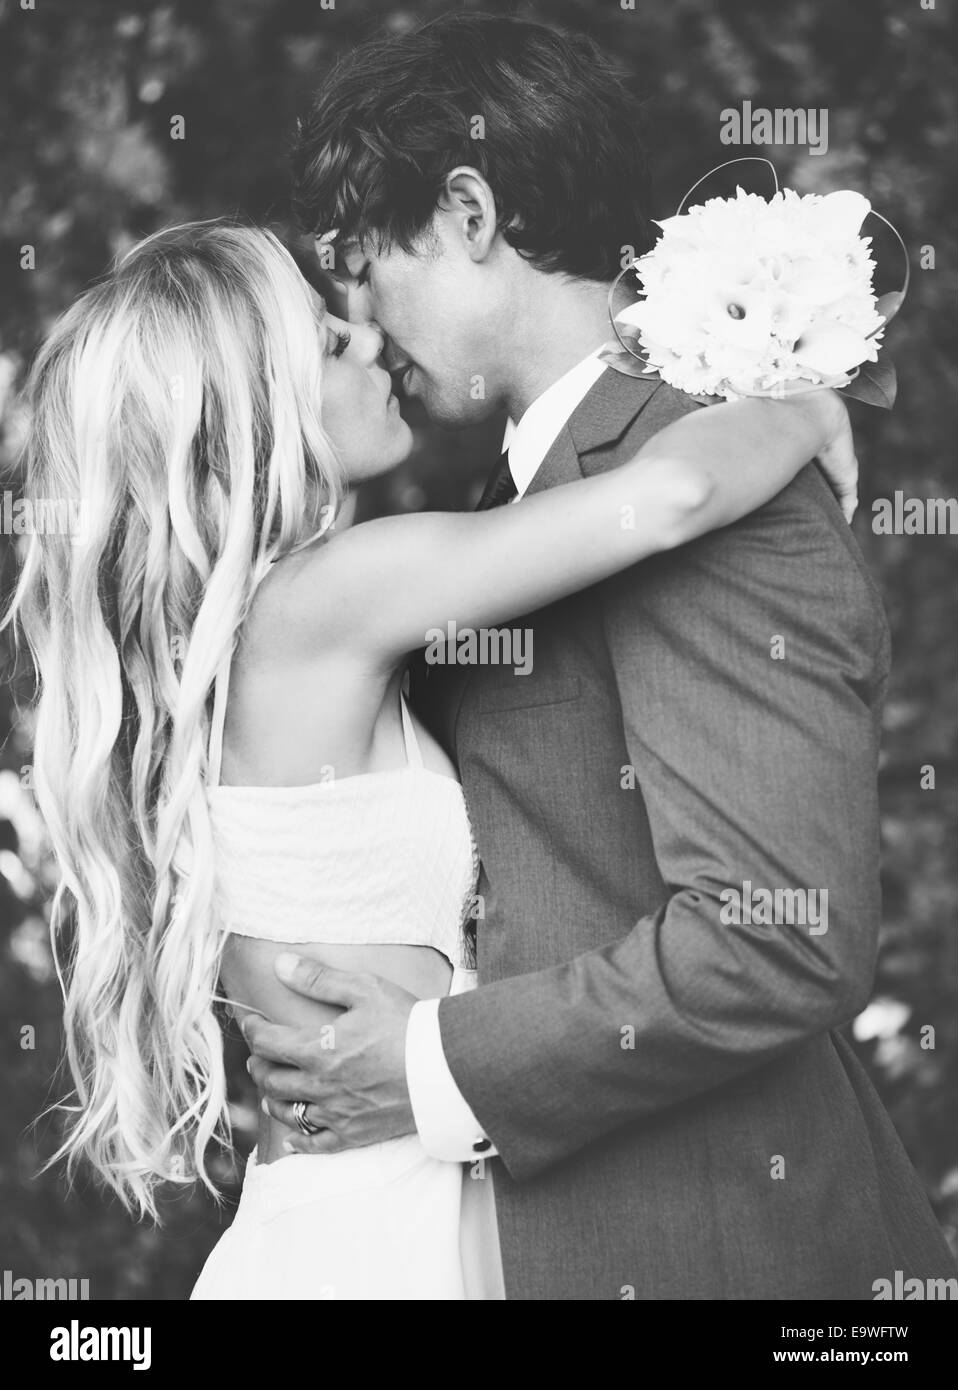 Wedding, Beautiful Romantic Bride and Groom Kissing and Embracing at Sunset. Black and White Image. Stock Photo